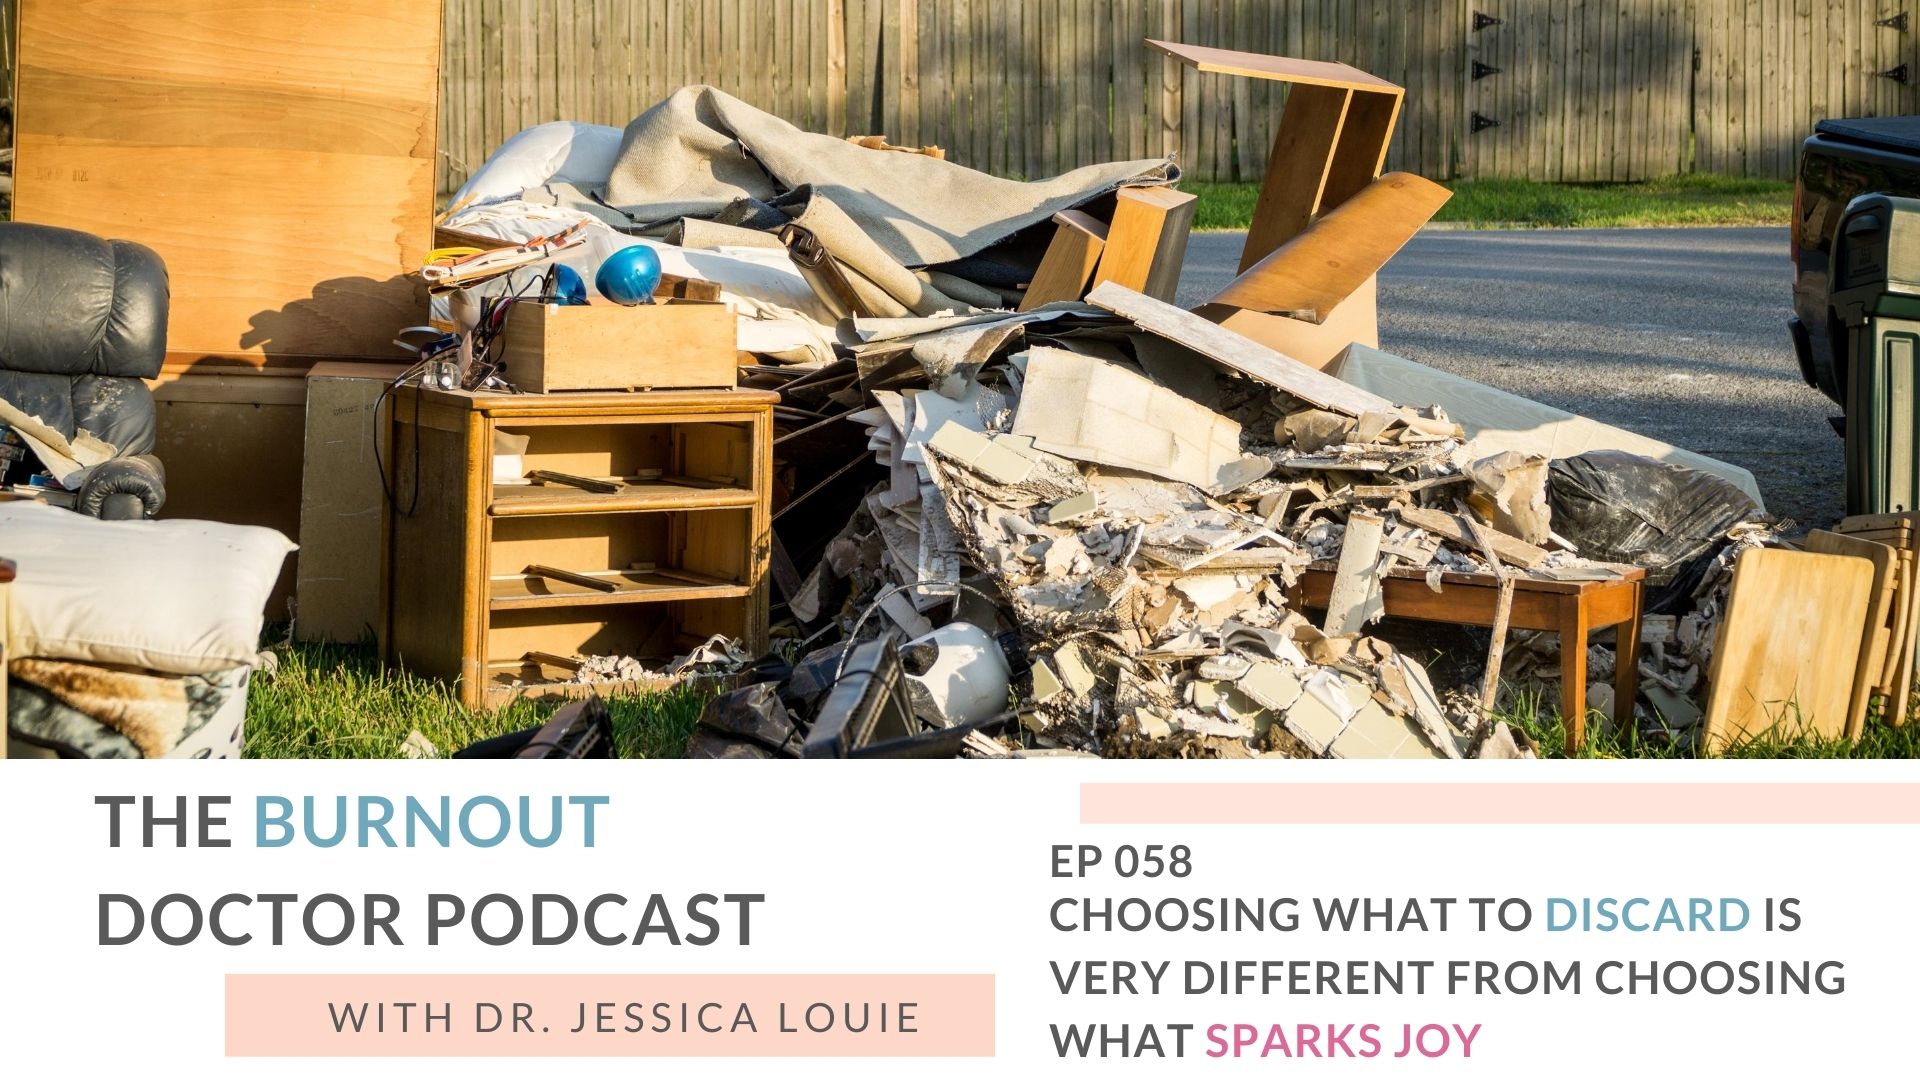 Choosing what to discard is very different from choosing what sparks joy. How to apply decluttering, simplifying and the KonMari Method with a positive mindset versus negative mindset towards living with less. Simplicity and simple living for healthcare families. Pharmacist burnout. Healthcare burnout coaching.